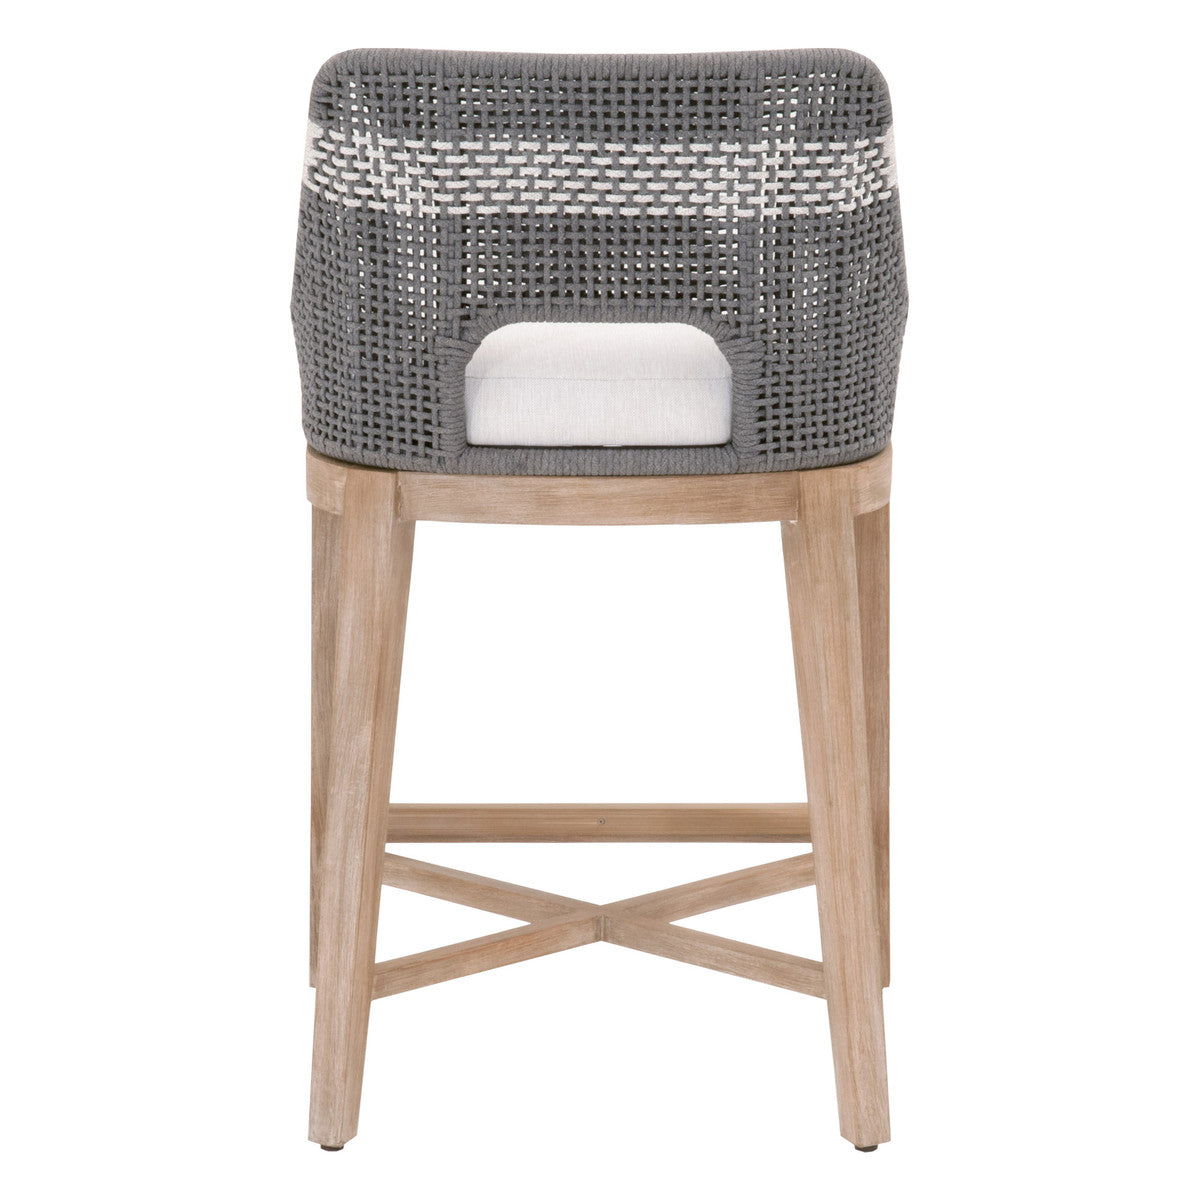 Tapestry Counter Stool in Dove Flat Rope, White Speckle Stripe, Performance White Speckle, Natural Gray Mahogany - 6850CS.DOV/WHT/NG